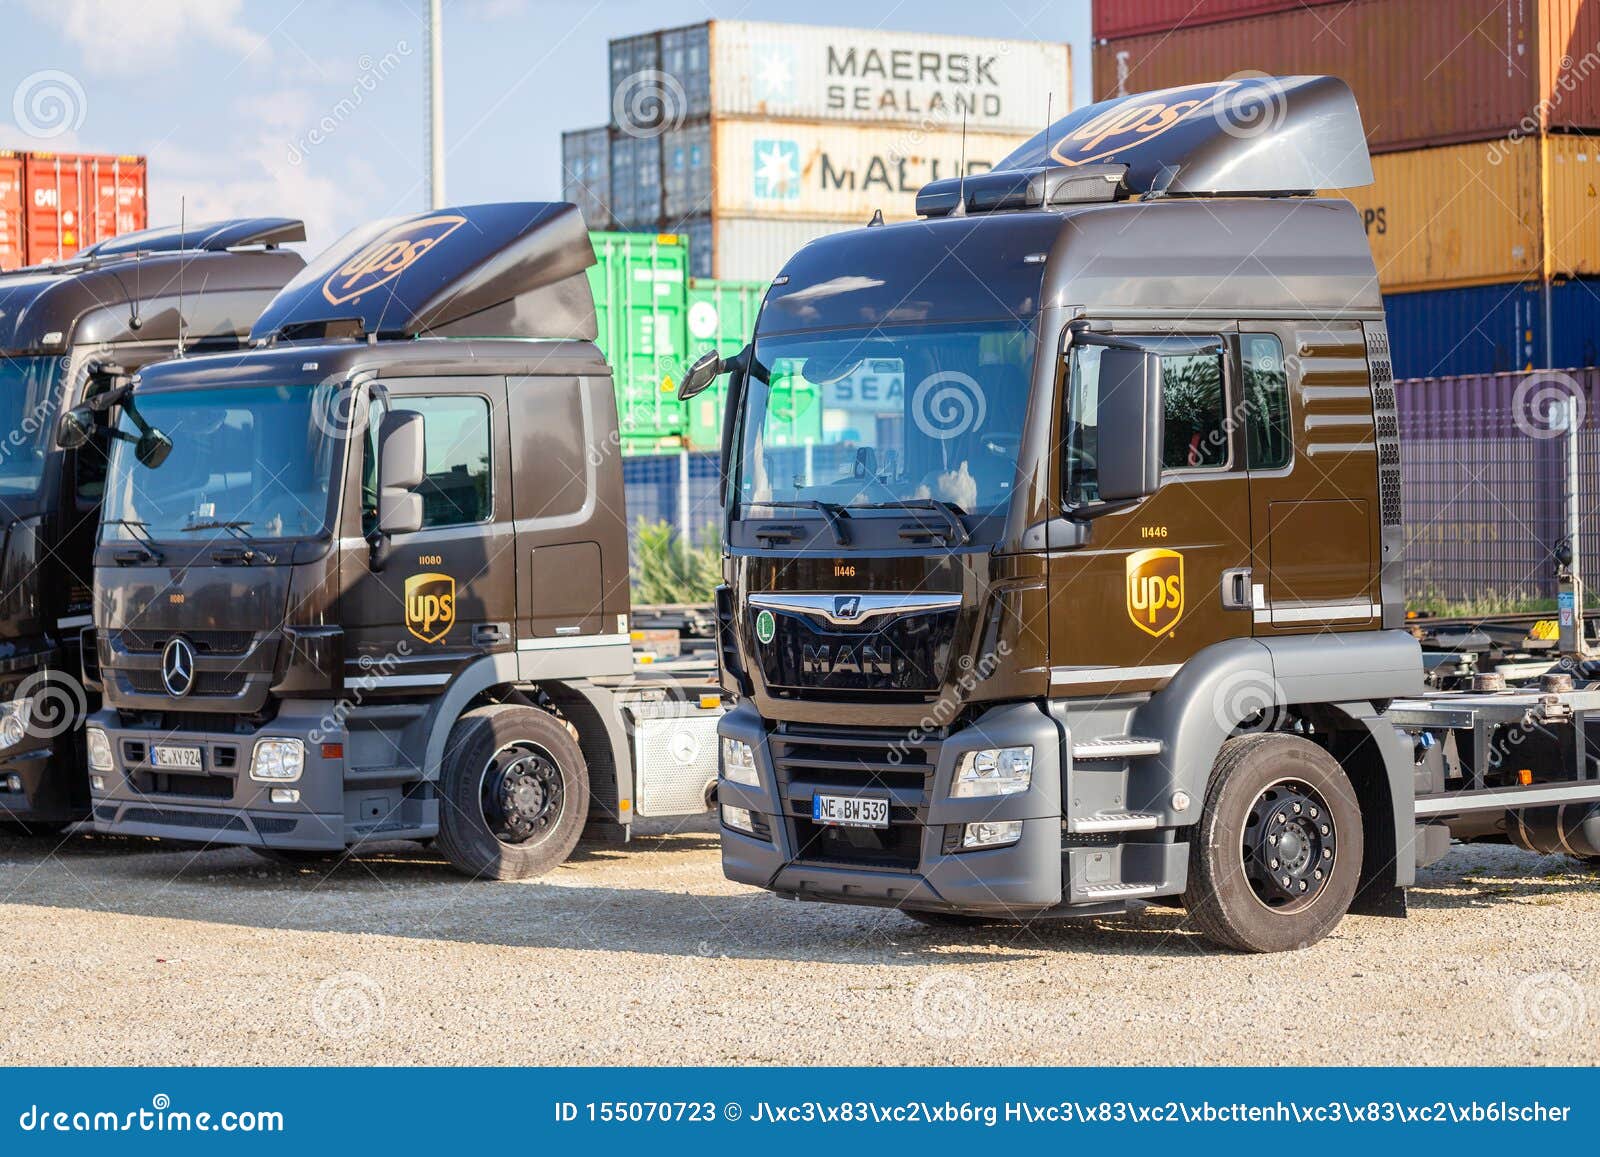 Different Trucks From The American Multinational Package ...